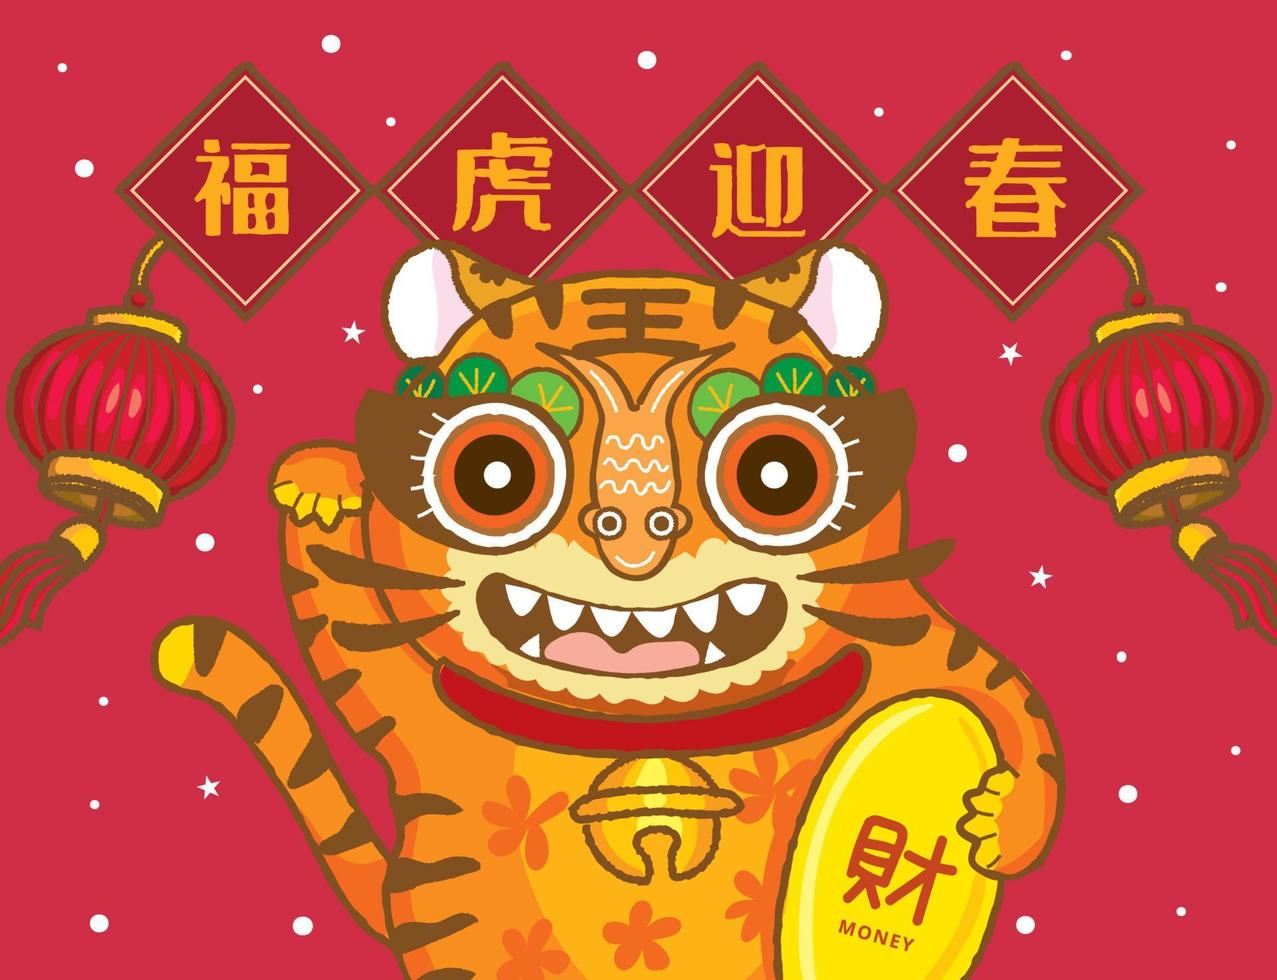 Chinese New Year with lucky tiger Fun Card Design, Chinese word translation,Lucky Tiger welcomes the Spring vector